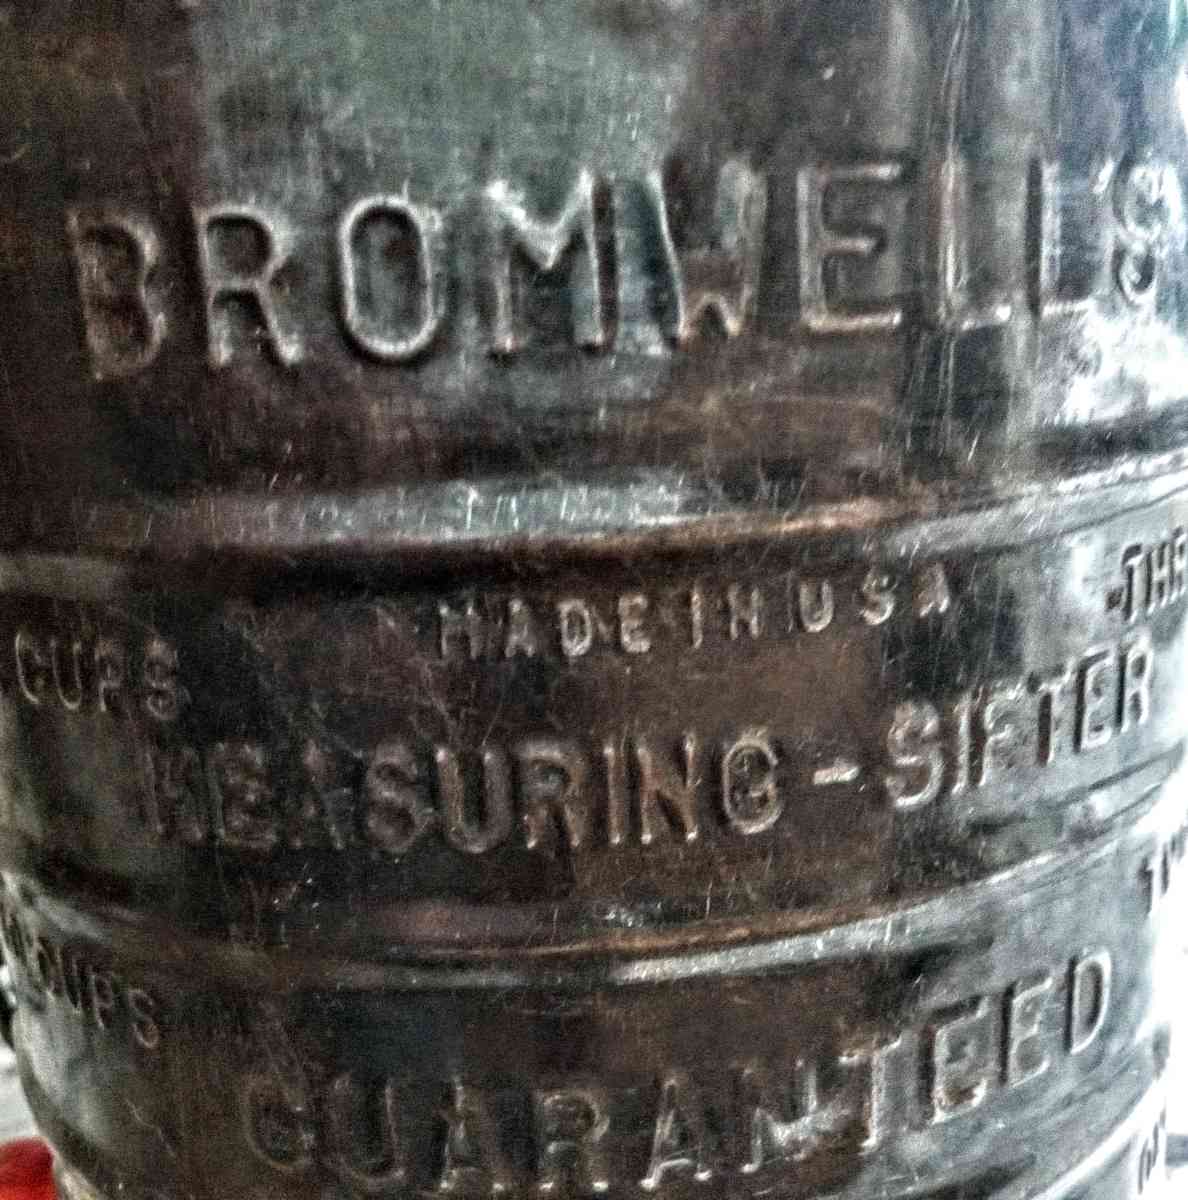 Bromwells 3 cups Metal Flour Sifter